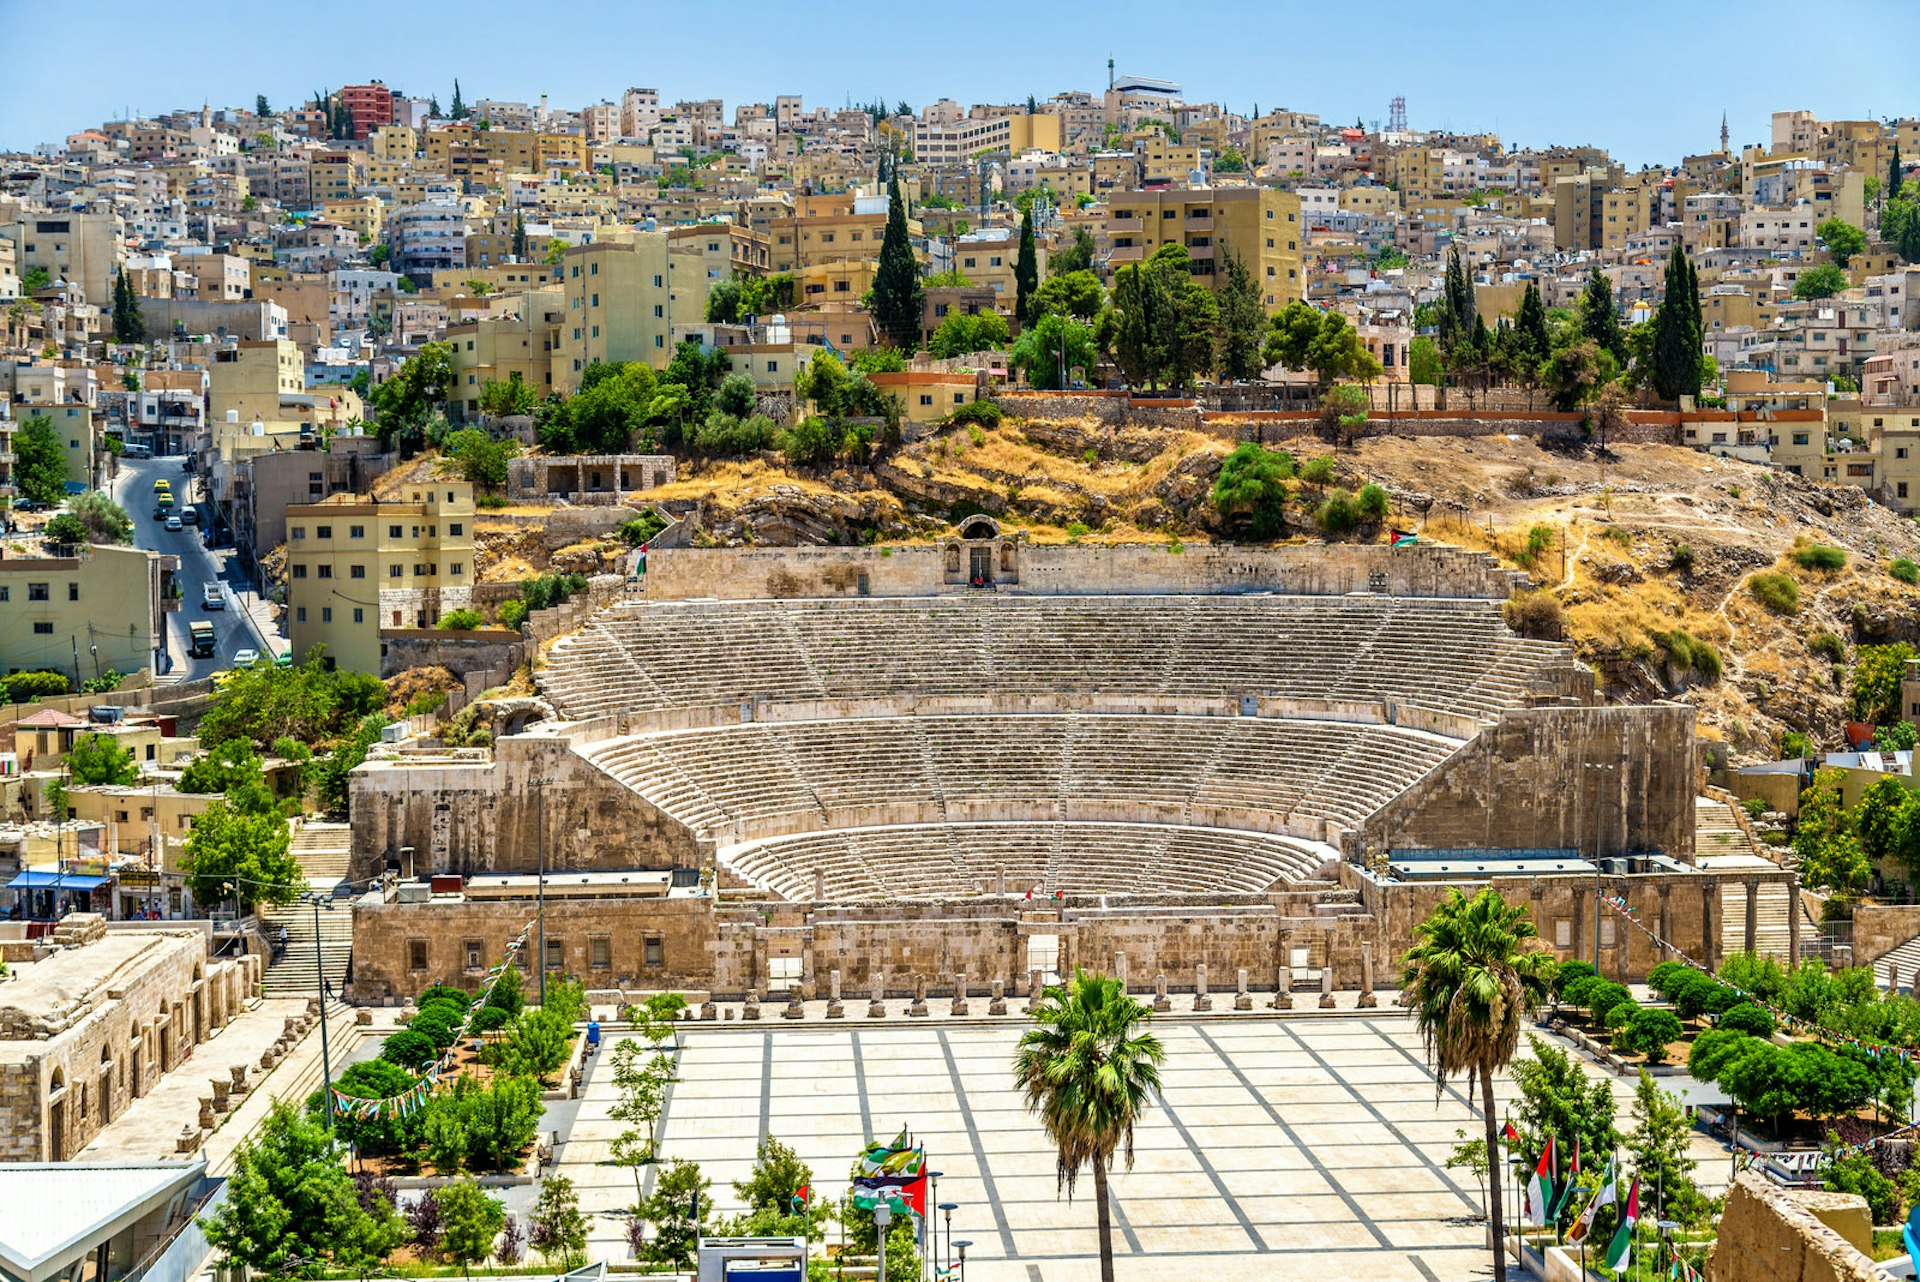 View of the Roman Theatre in Amman, Jordan. Image by Leonid Andronov / Shutterstock